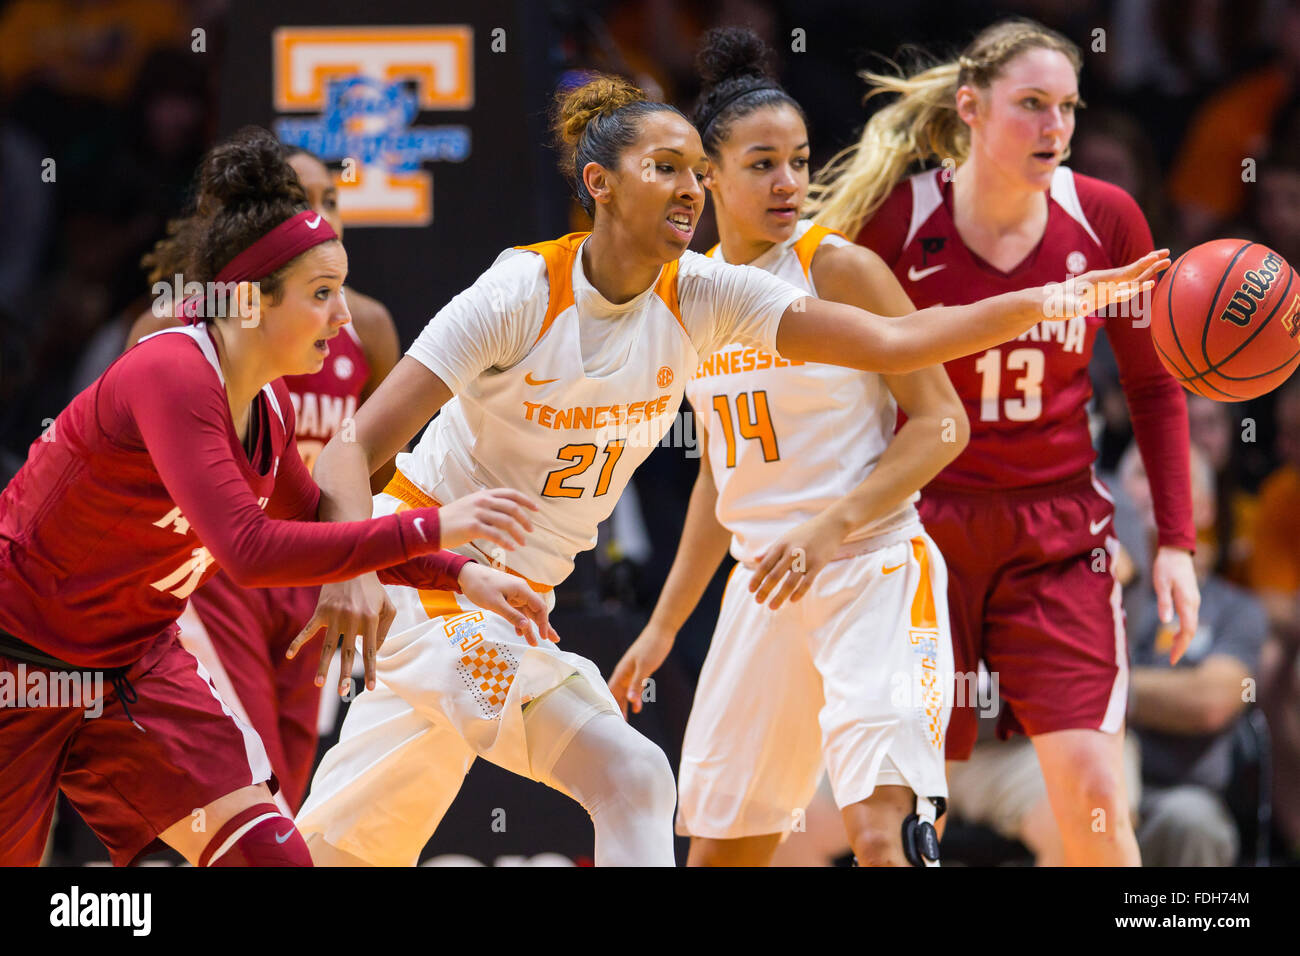 January 31, 2016: Hannah Cook #11 of the Alabama Crimson Tide and Mercedes Russell #21 of the Tennessee Lady Volunteers reach for a loose ball during the NCAA basketball game between the University of Tennessee Lady Volunteers and the University of Alabama Crimson Tide at Thompson Boling Arena in Knoxville TN Tim Gangloff/CSM Stock Photo